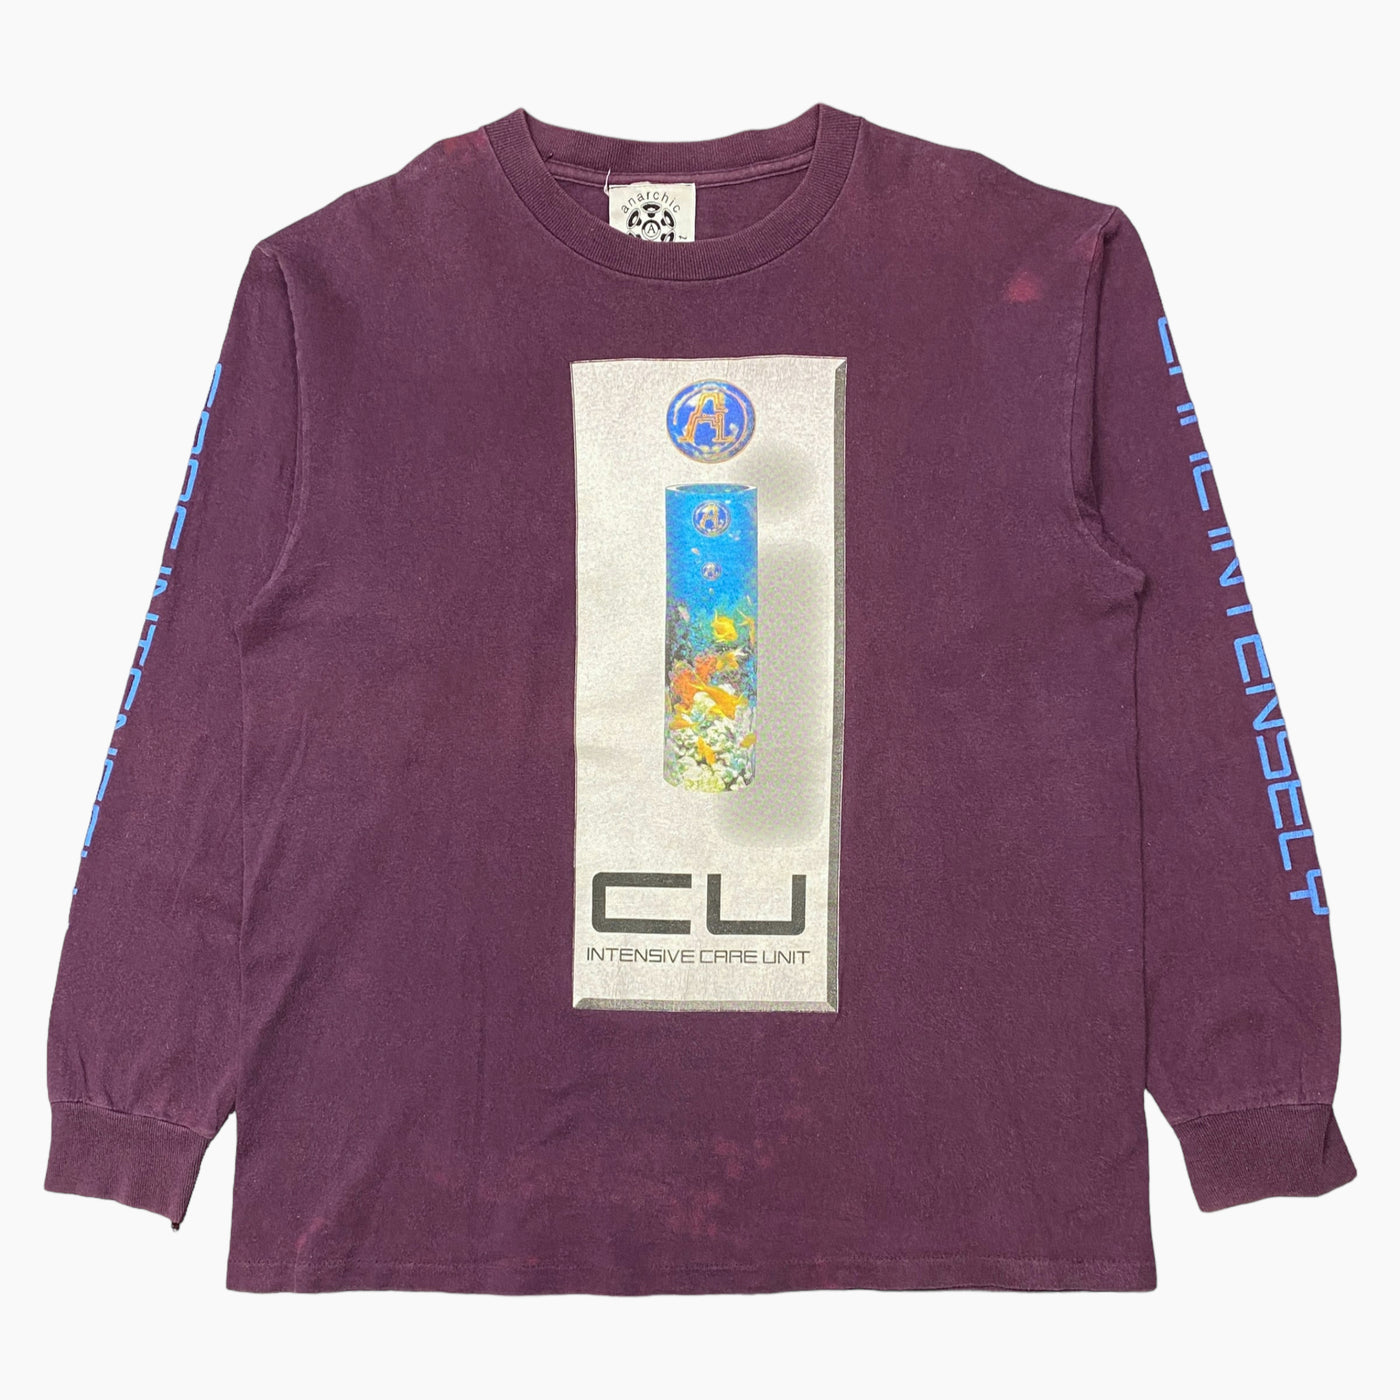 EARLY 90S ANARCHIC ADJUSTMENT LONG SLEEVE